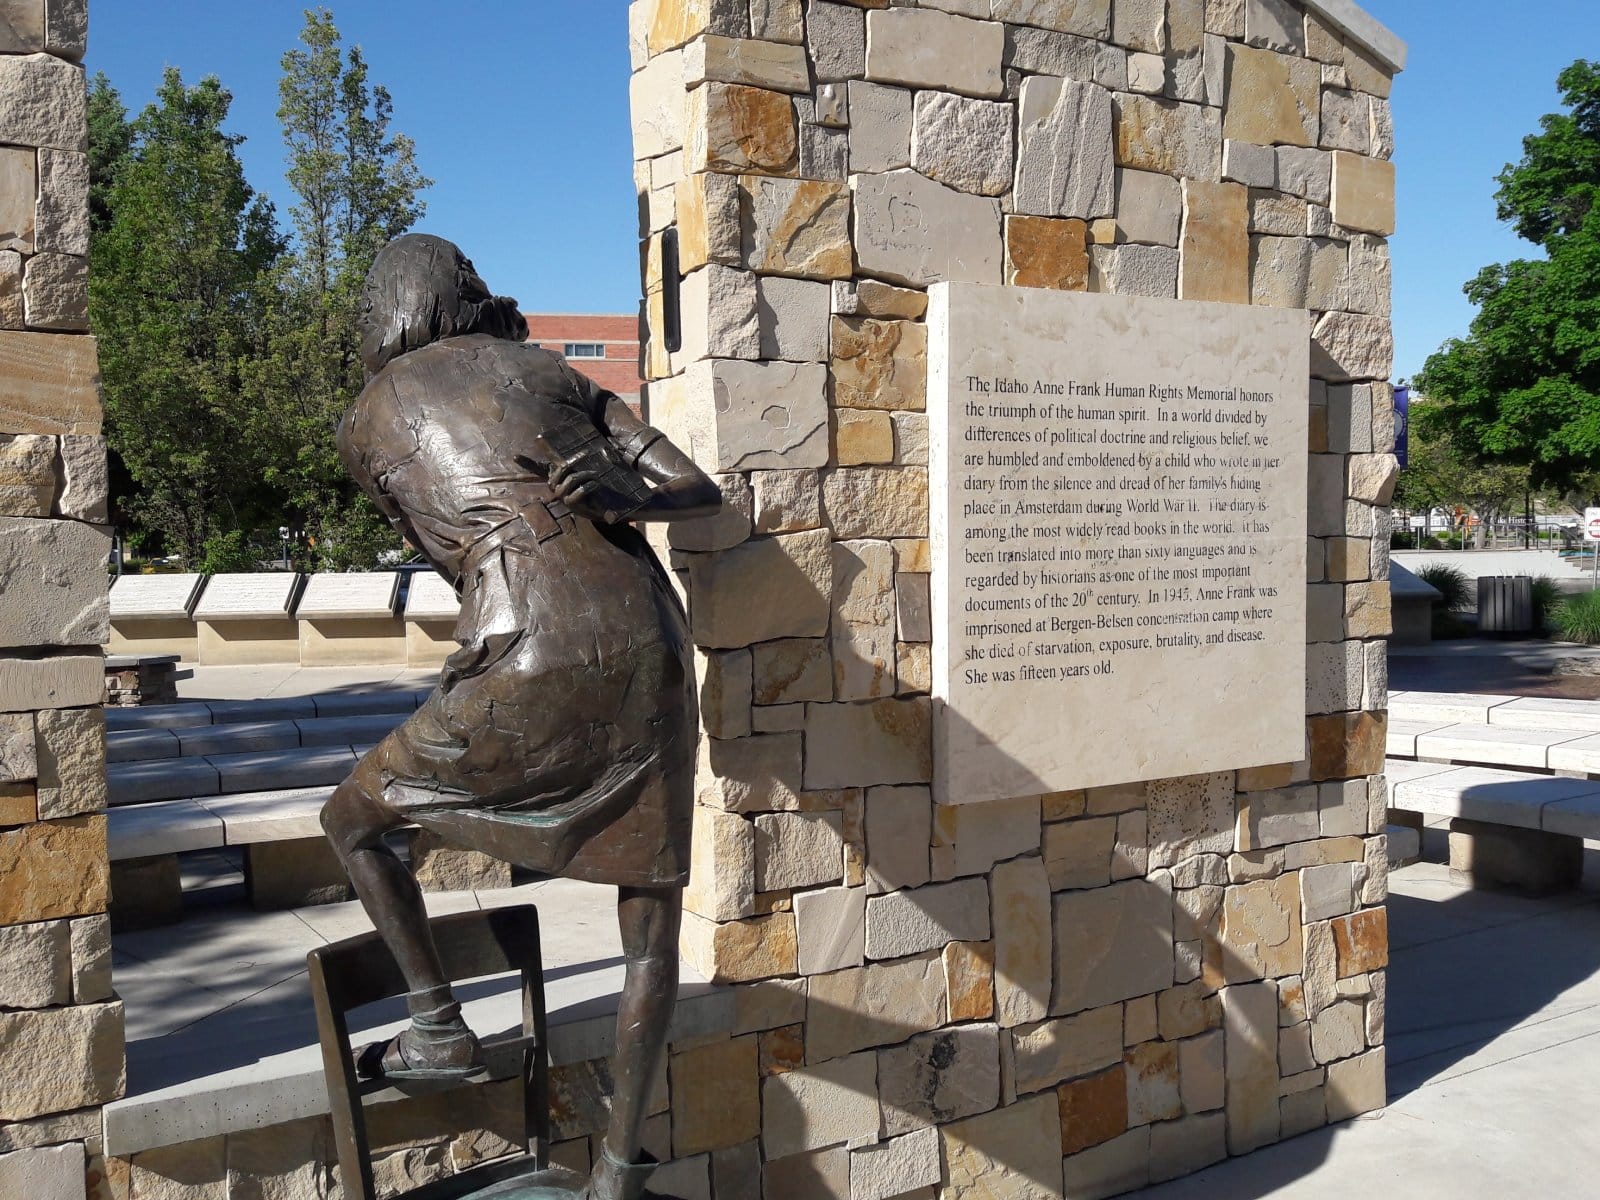 <p class="wp-caption-text">Image Credit: Shutterstock / Darrel Guilbeau</p>  <p>Visit this inspiring and free memorial in Boise, promoting human rights and reflection through art and quotes. It’s a profound experience, reminding visitors of the strength of the human spirit.</p>